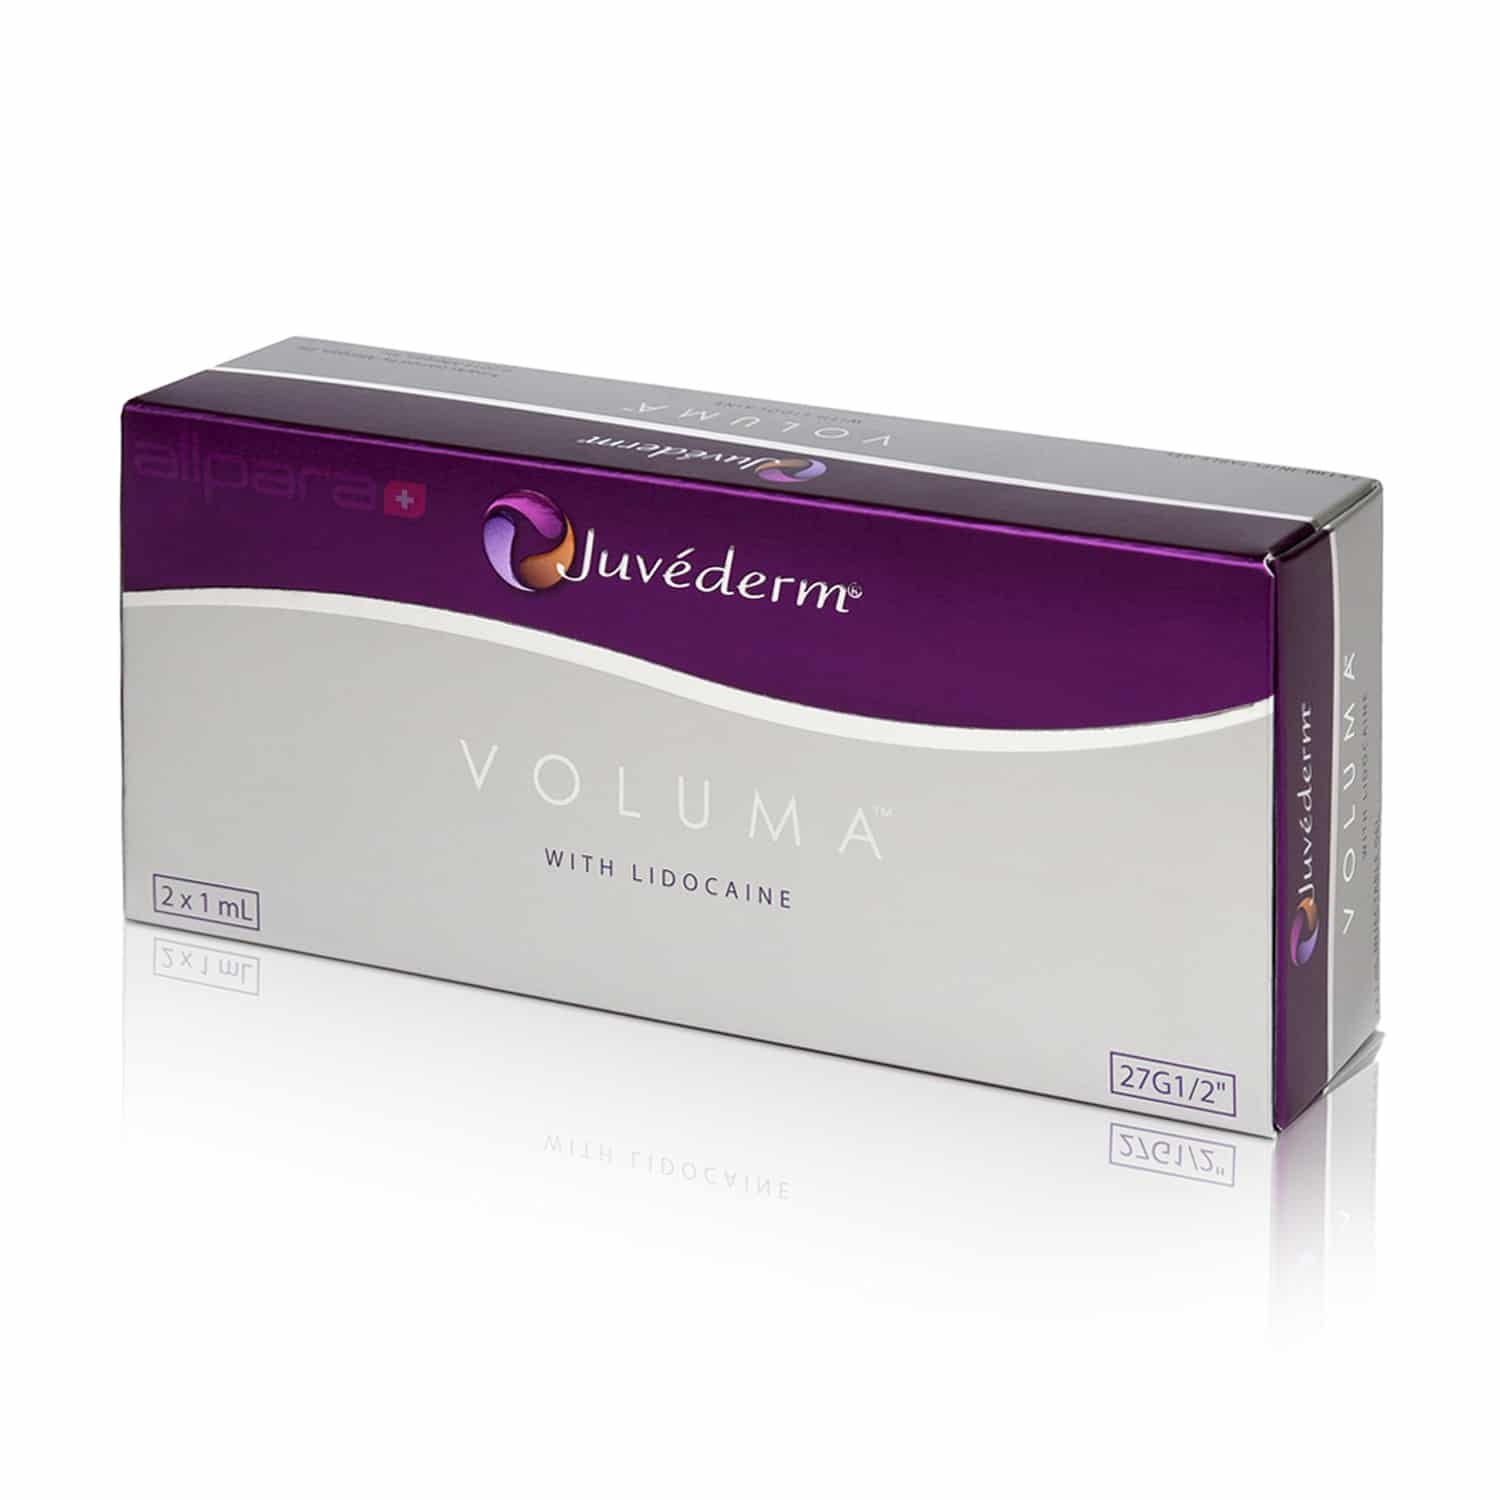 photo of Juvederm Voluma injectables available at Spring Street Dermatology in NYC